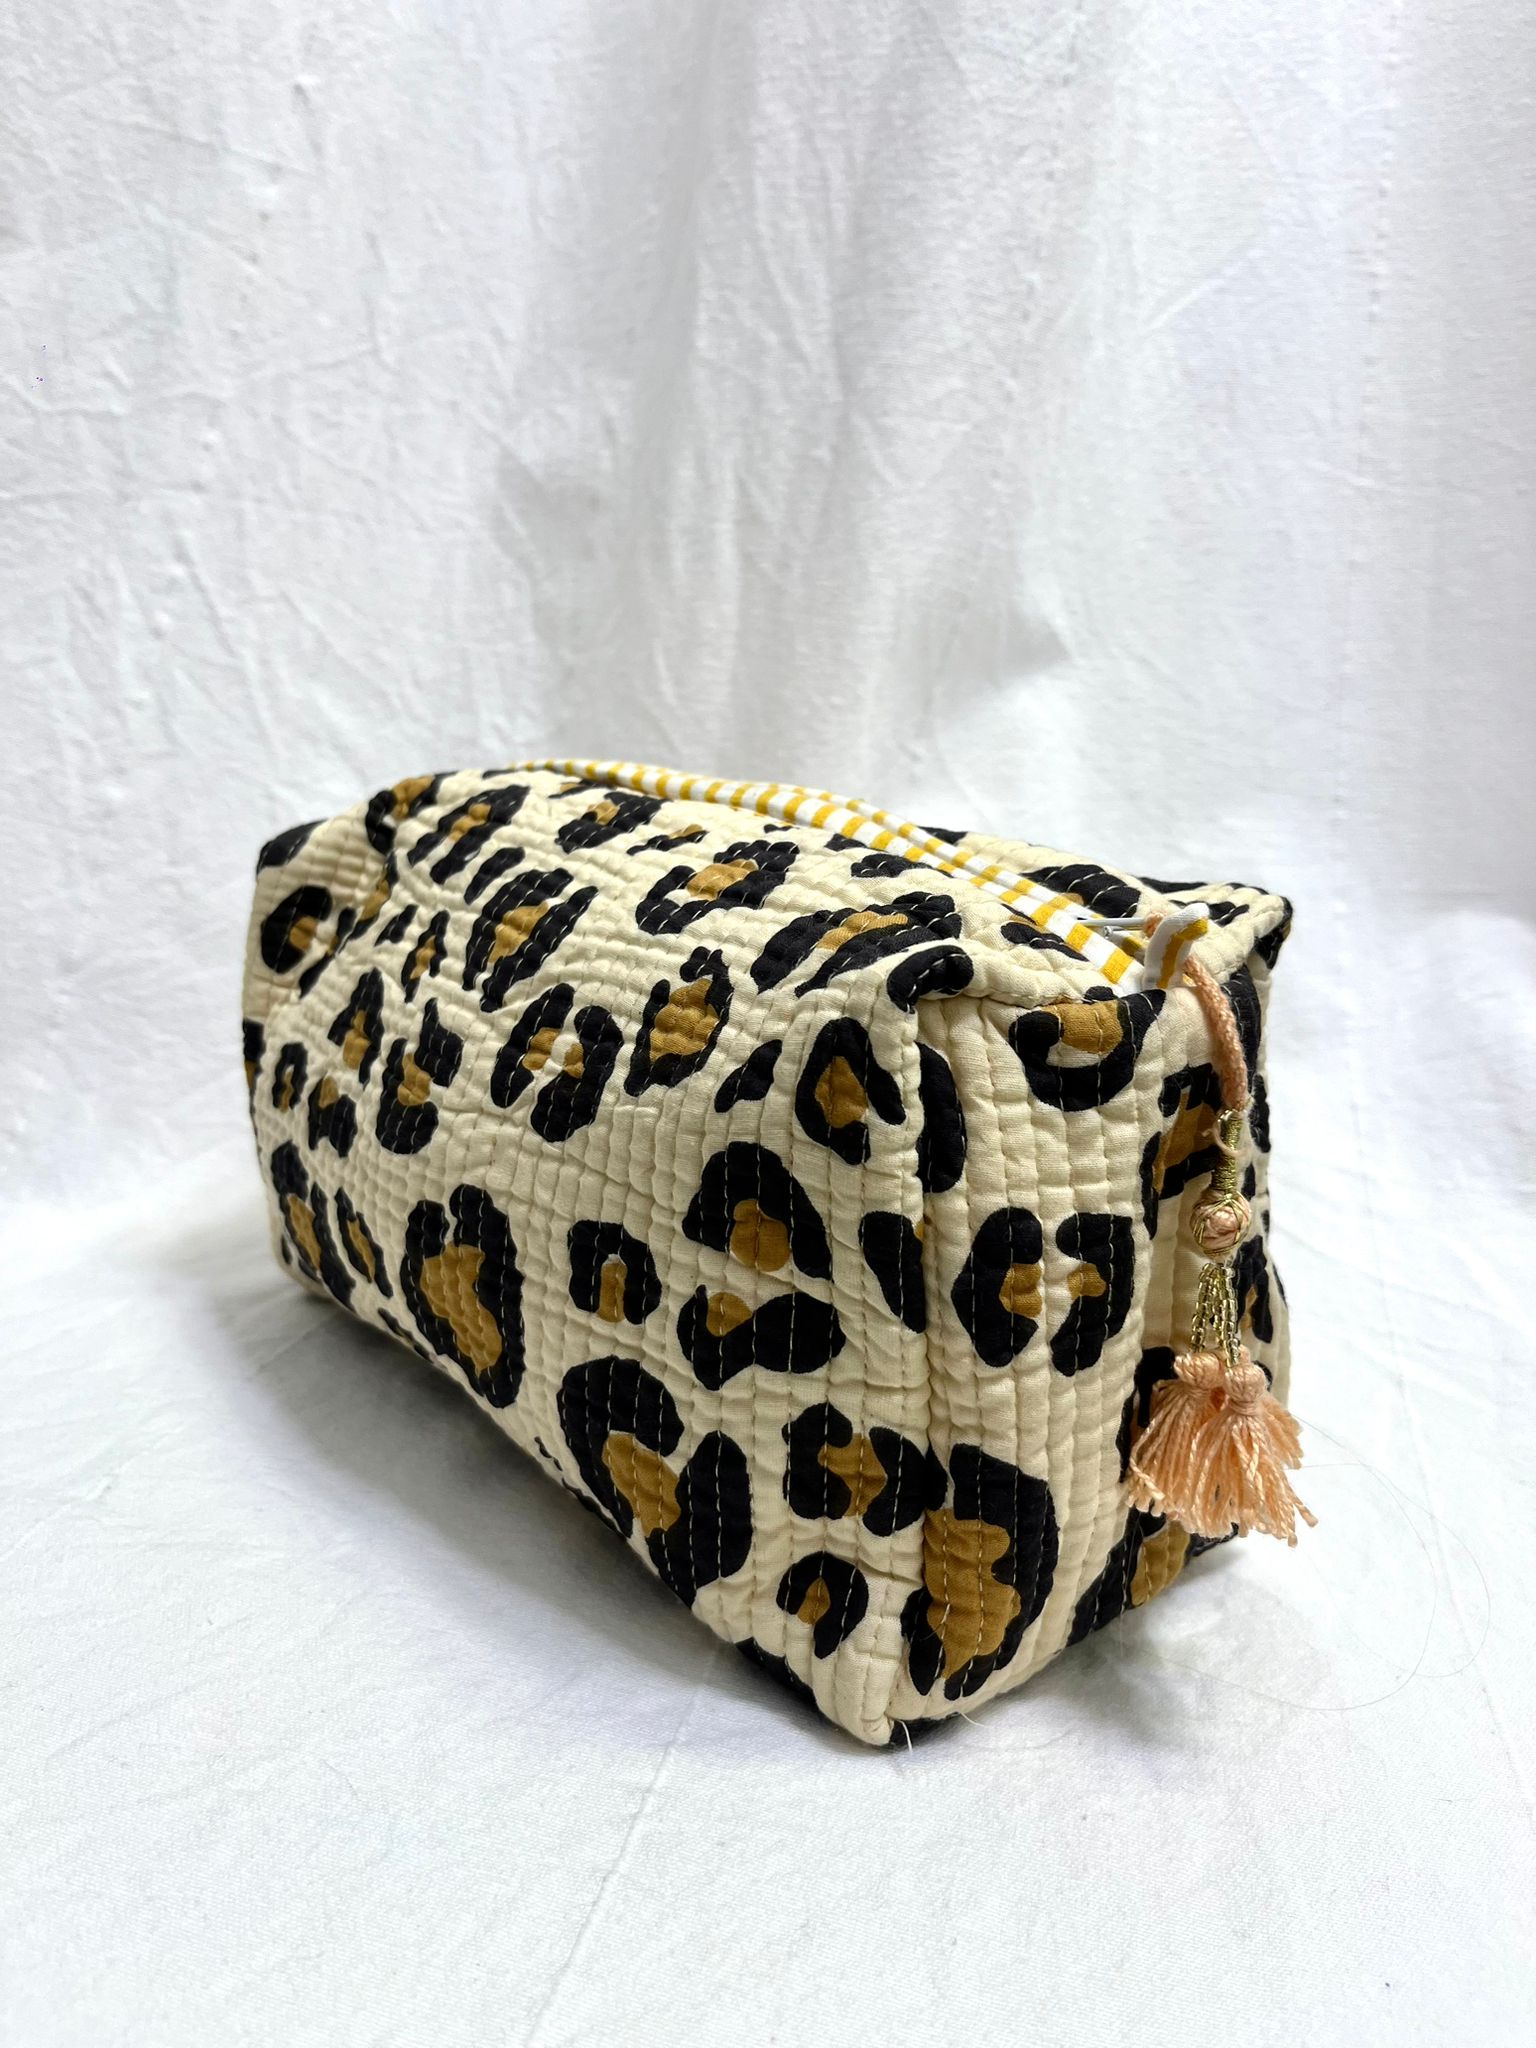 Bohemia Couture Beauty Cosmetic Bag - Leopard Print